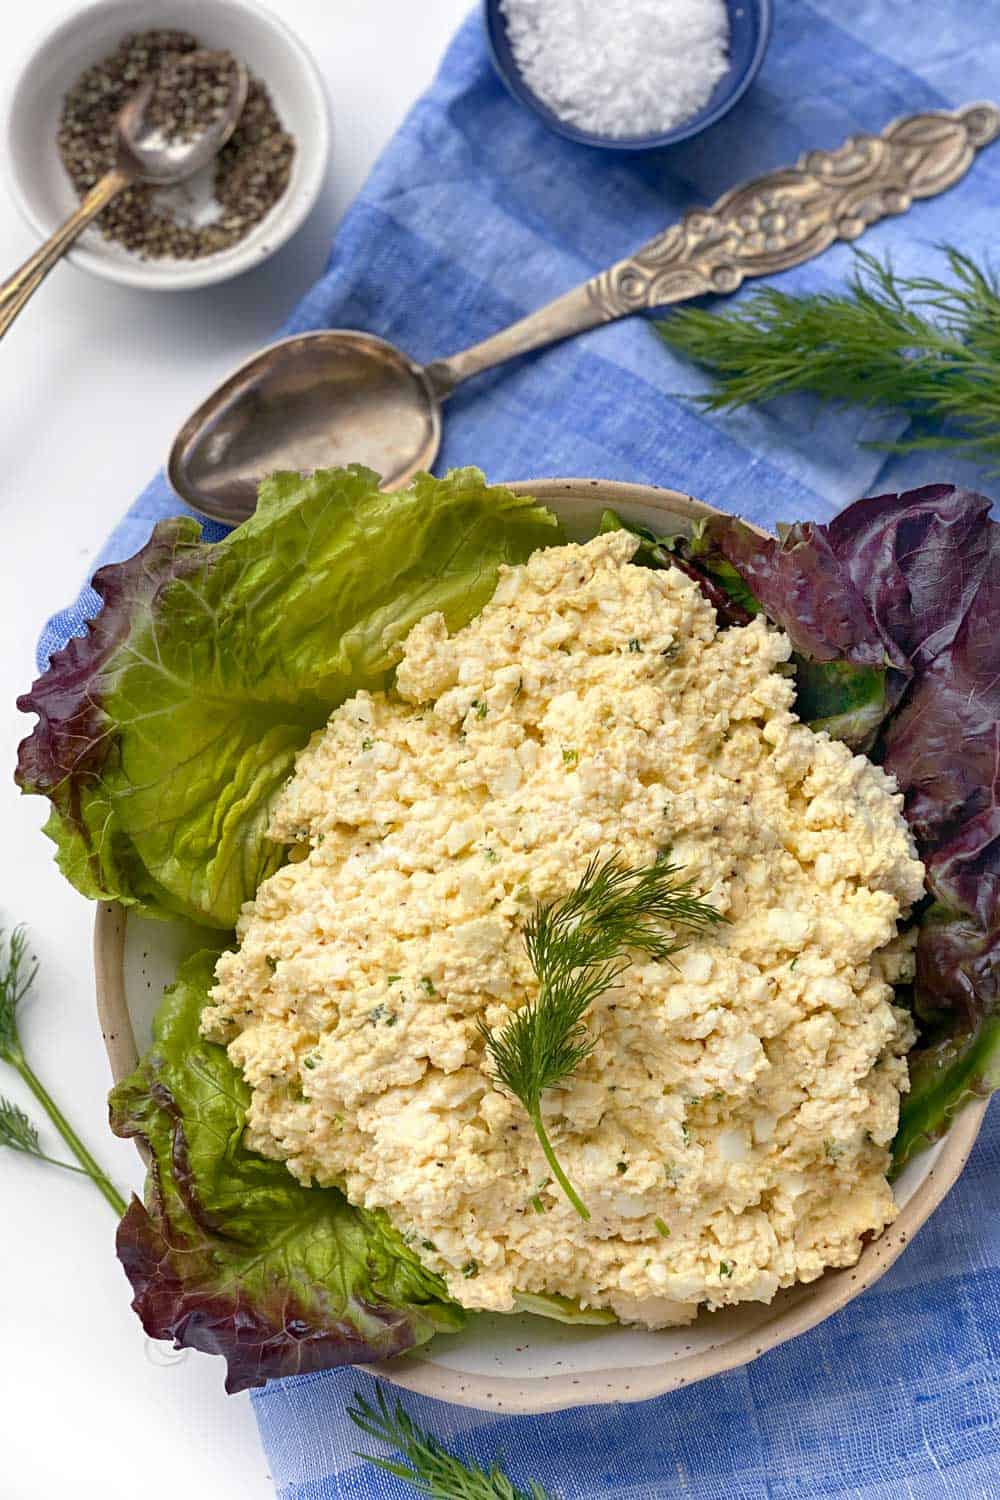 egg salad on lettuce leaves in a bowl with a sprig of dill in the middle